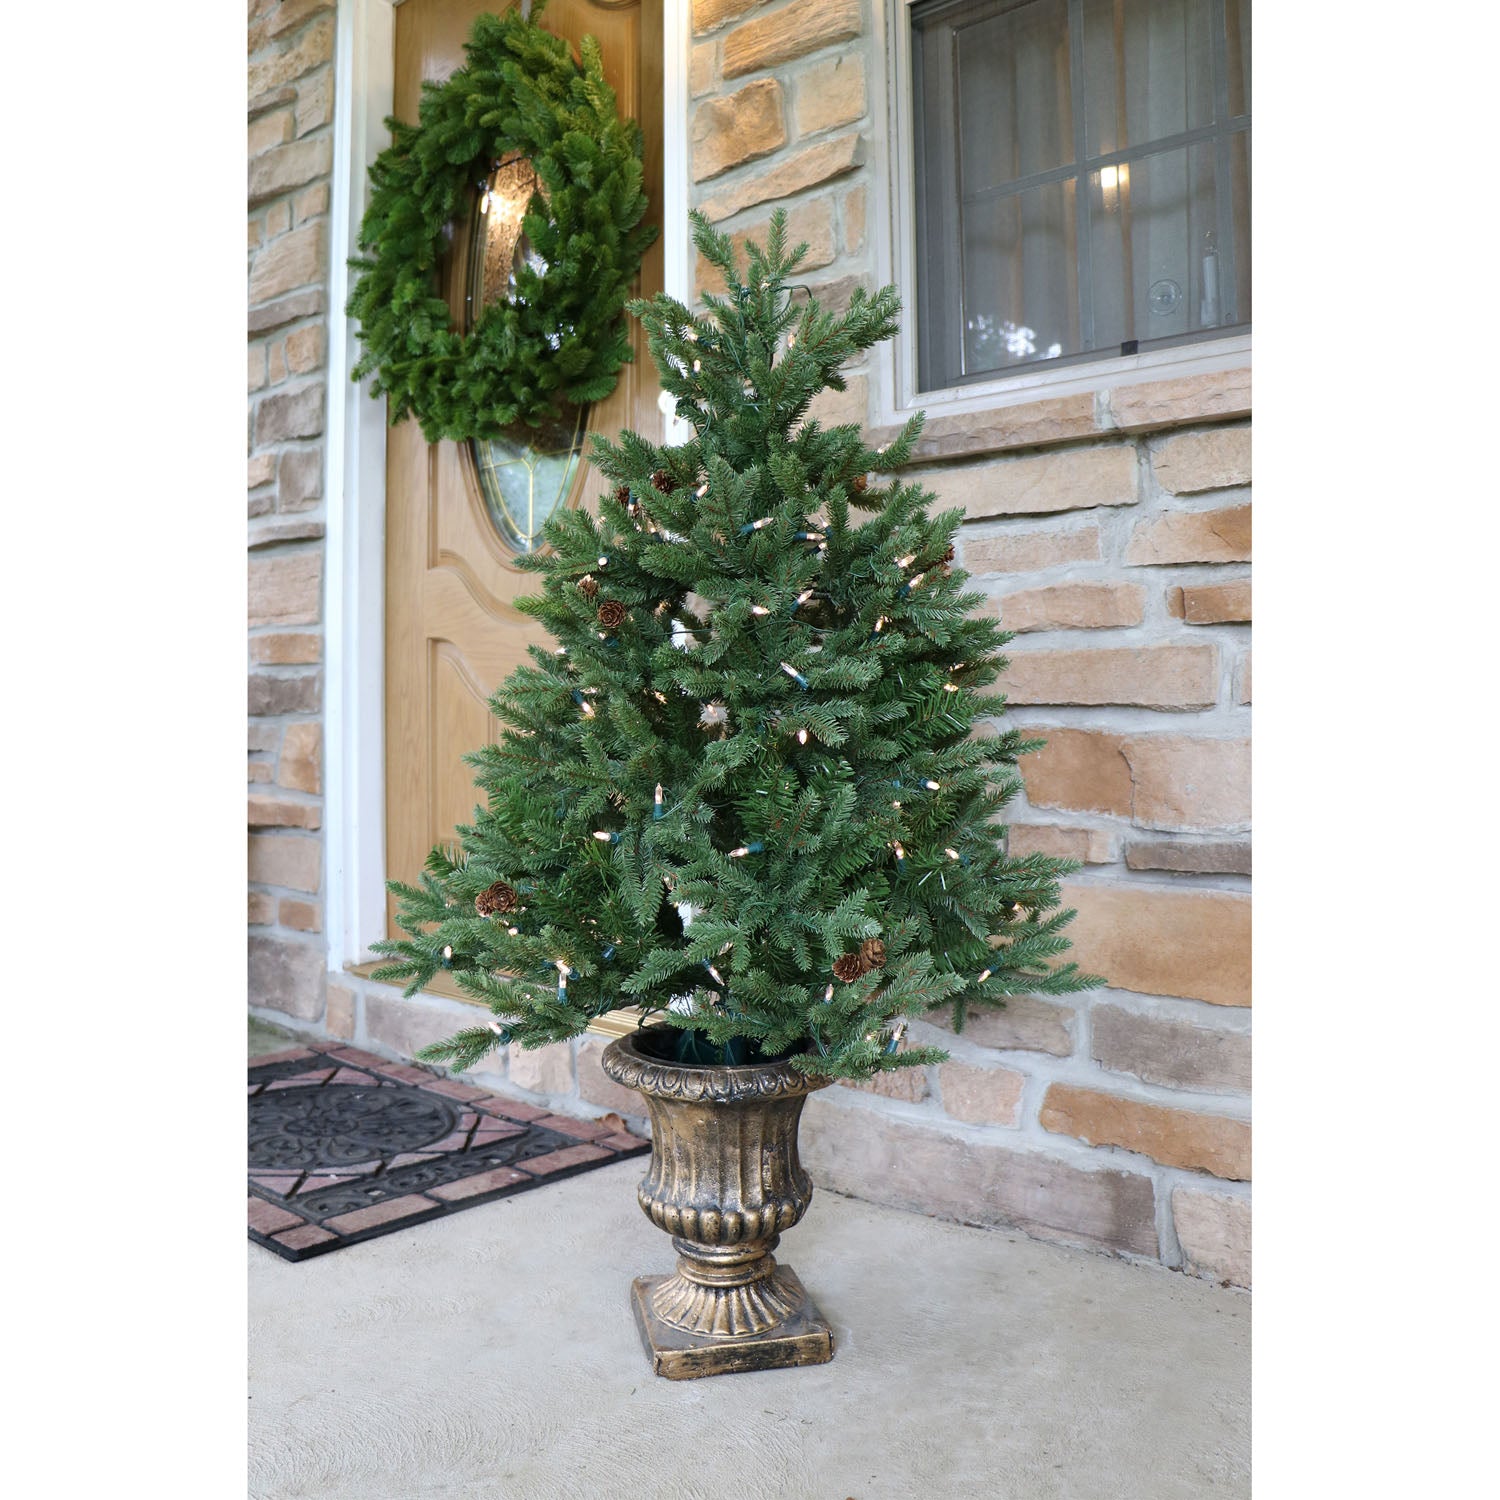 Fraser Hill Farm -  4-Ft. Noble Fir Artificial Tree with Metallic Urn Base and Multi-Colored LED String Lights